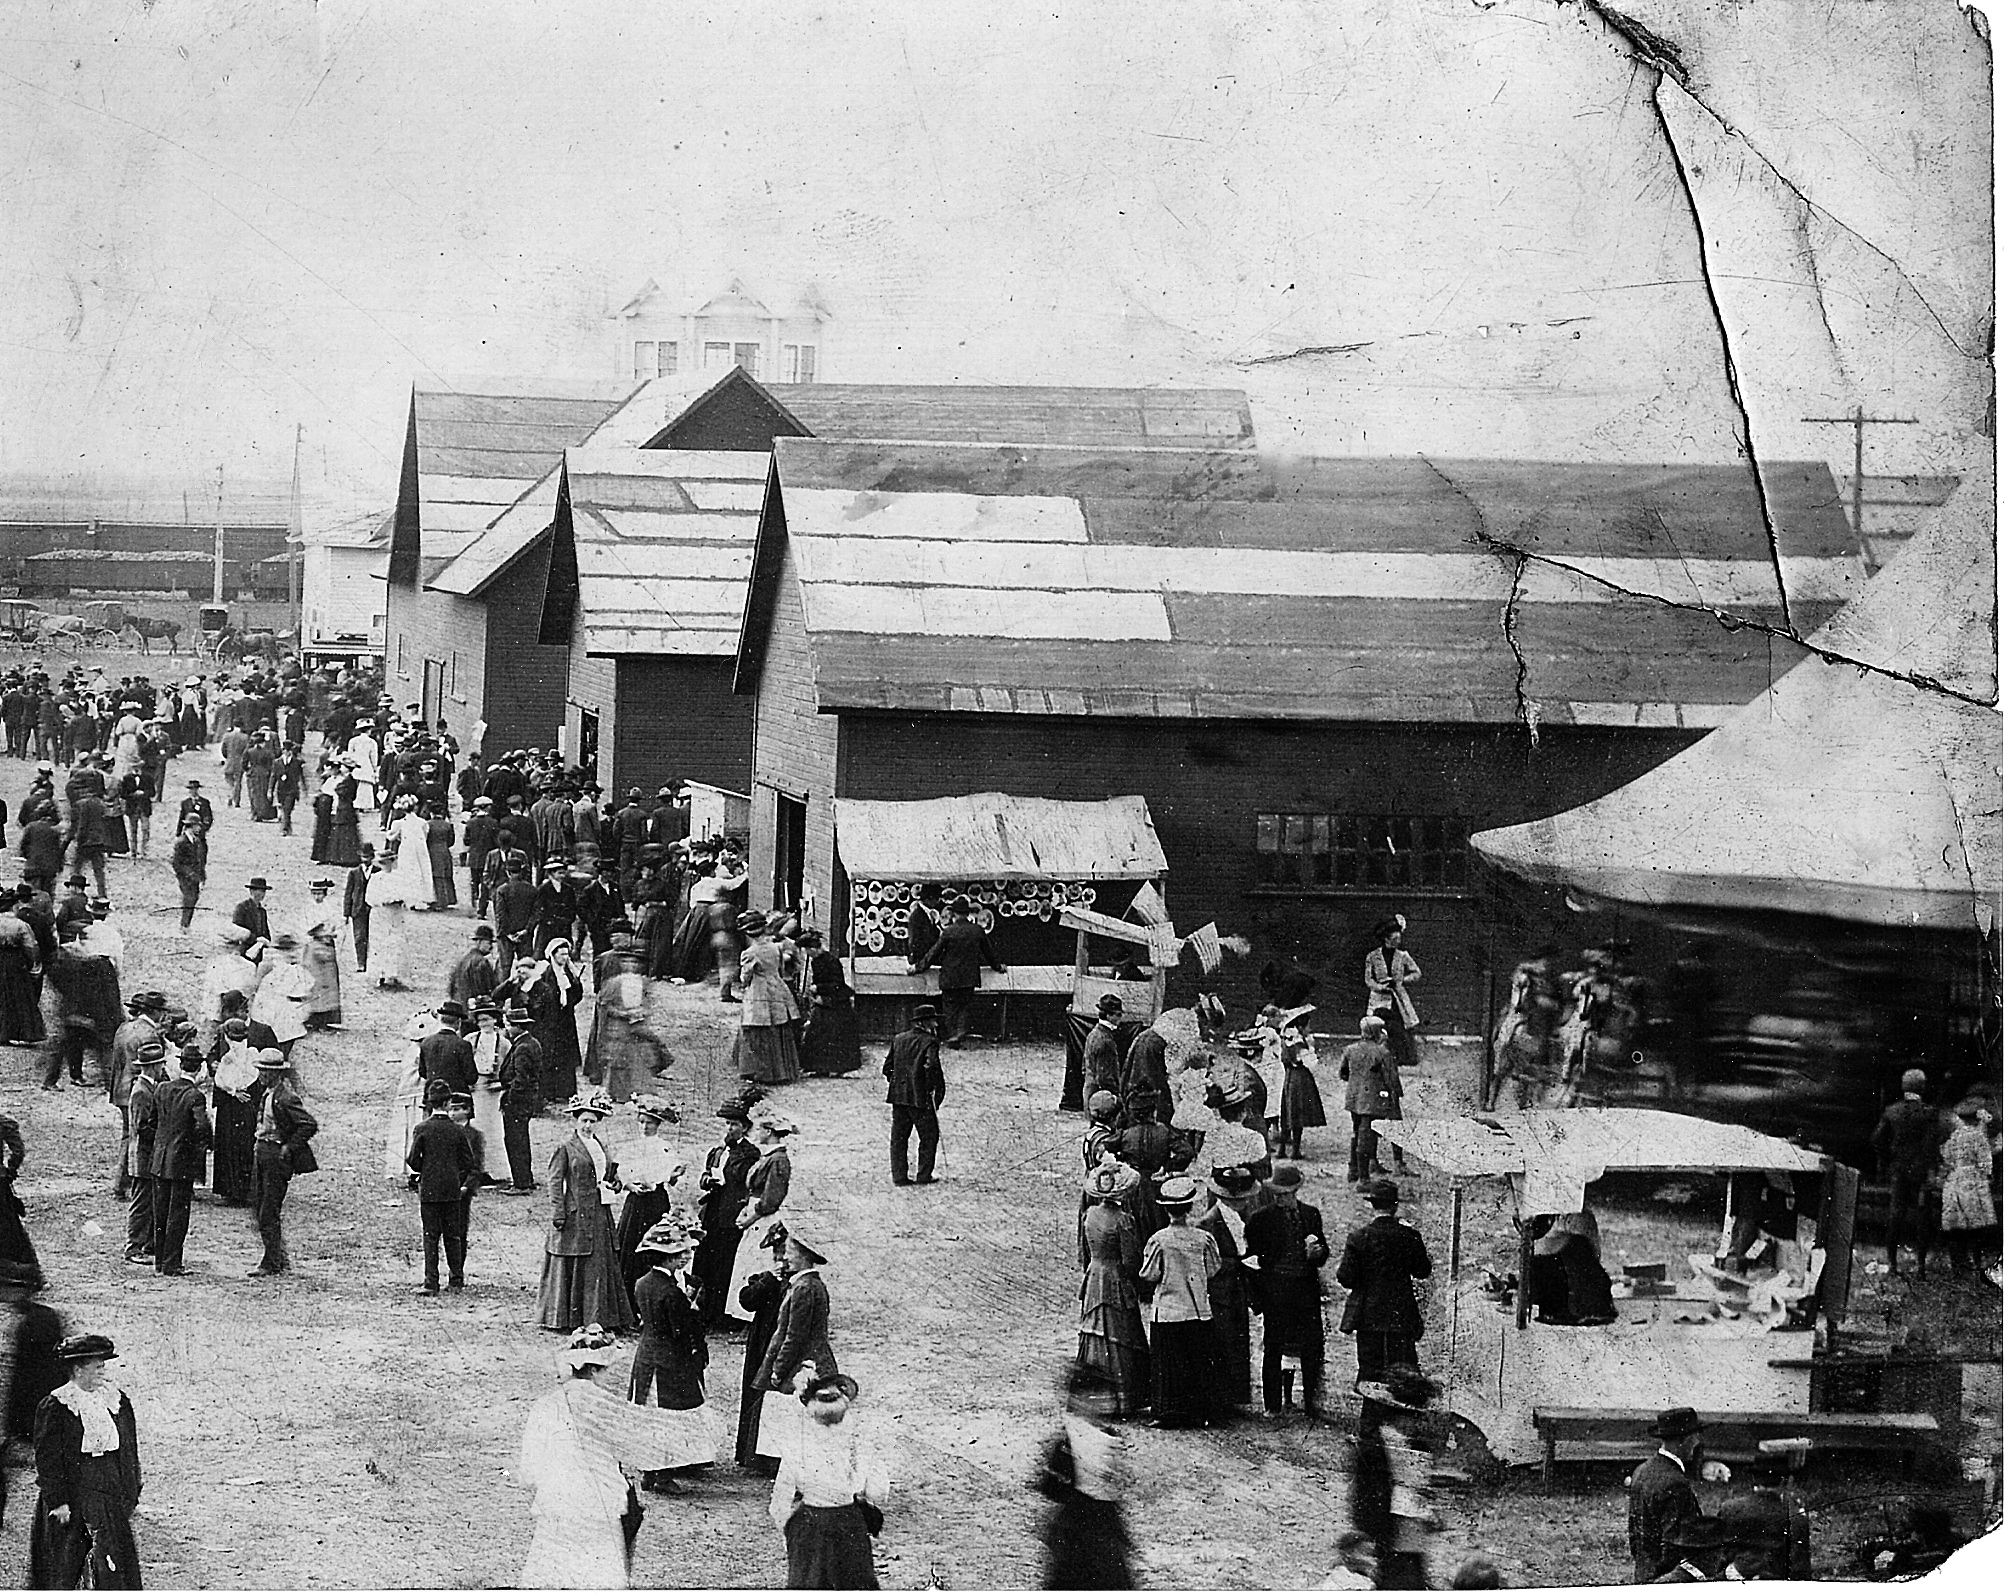 Fairgrounds in Cadillac